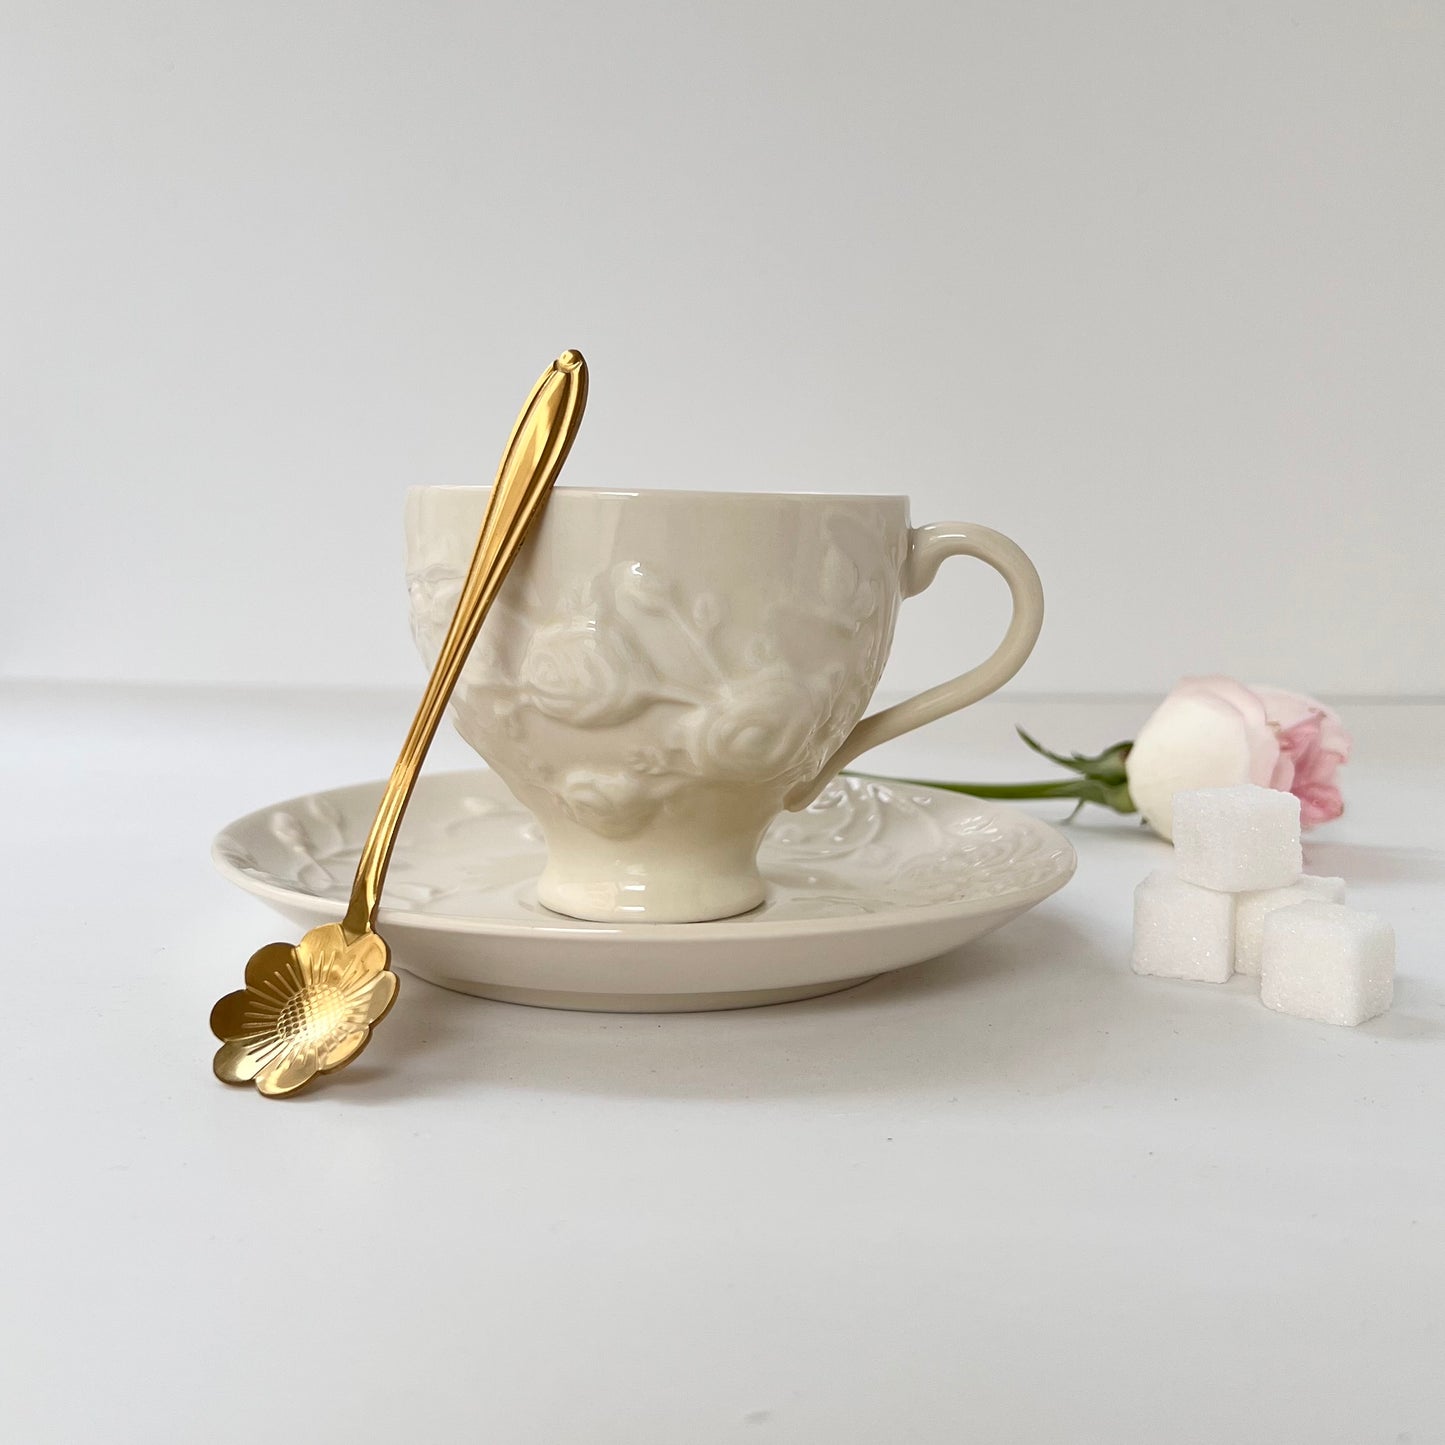 European Embossed Tea Cup and Saucer